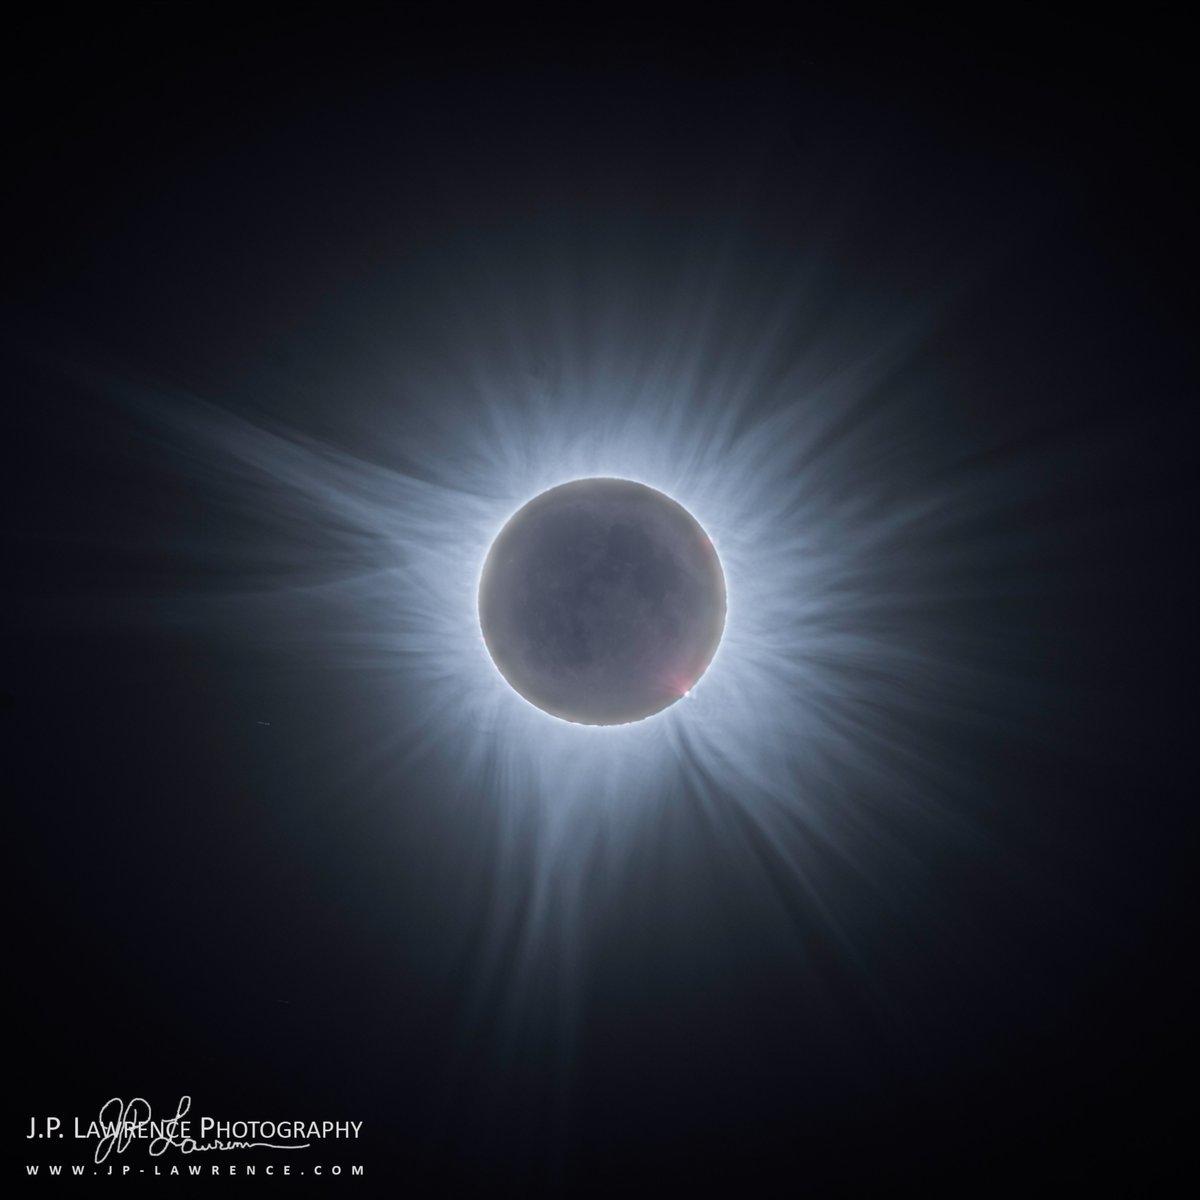 This image is one I have been dreaming about since 2017. This is comprised of 97 images. I'm particularly happy that I was able to capture Earthshine where the sunlight on the earth illuminates the moon during totality.

#TotalSolarEclipse #TotalSolarEclipse2024